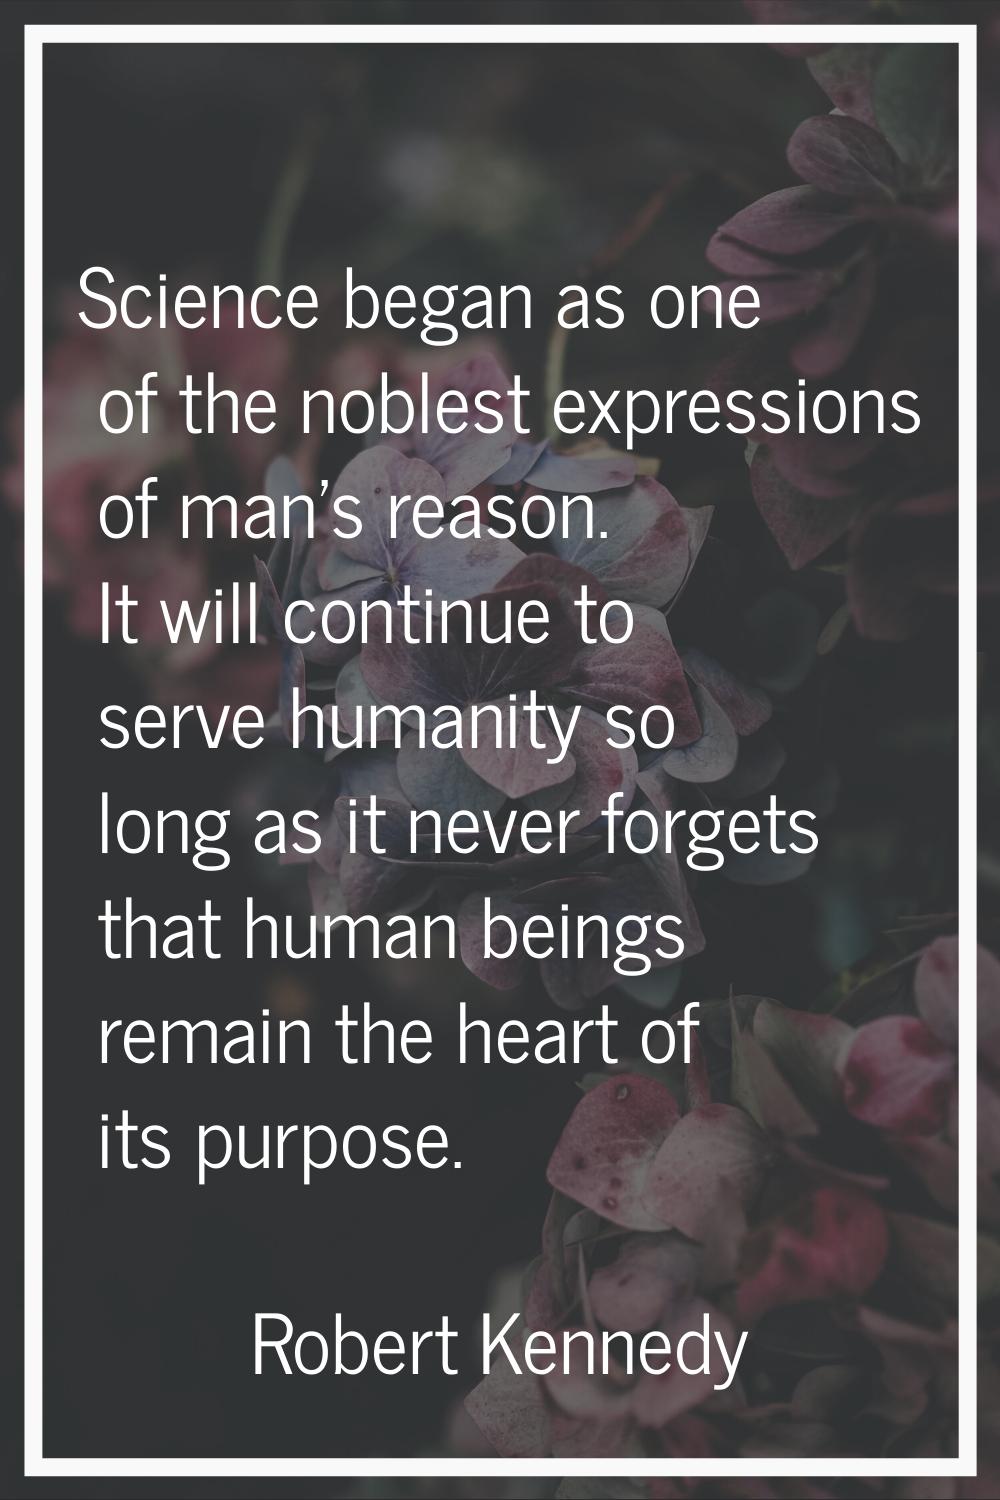 Science began as one of the noblest expressions of man's reason. It will continue to serve humanity